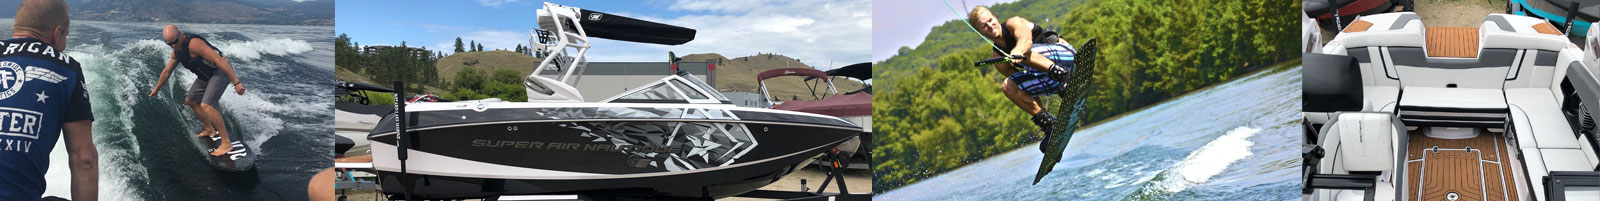 Photos of Nautique Super Air Wakeboard and Wakesurf boat